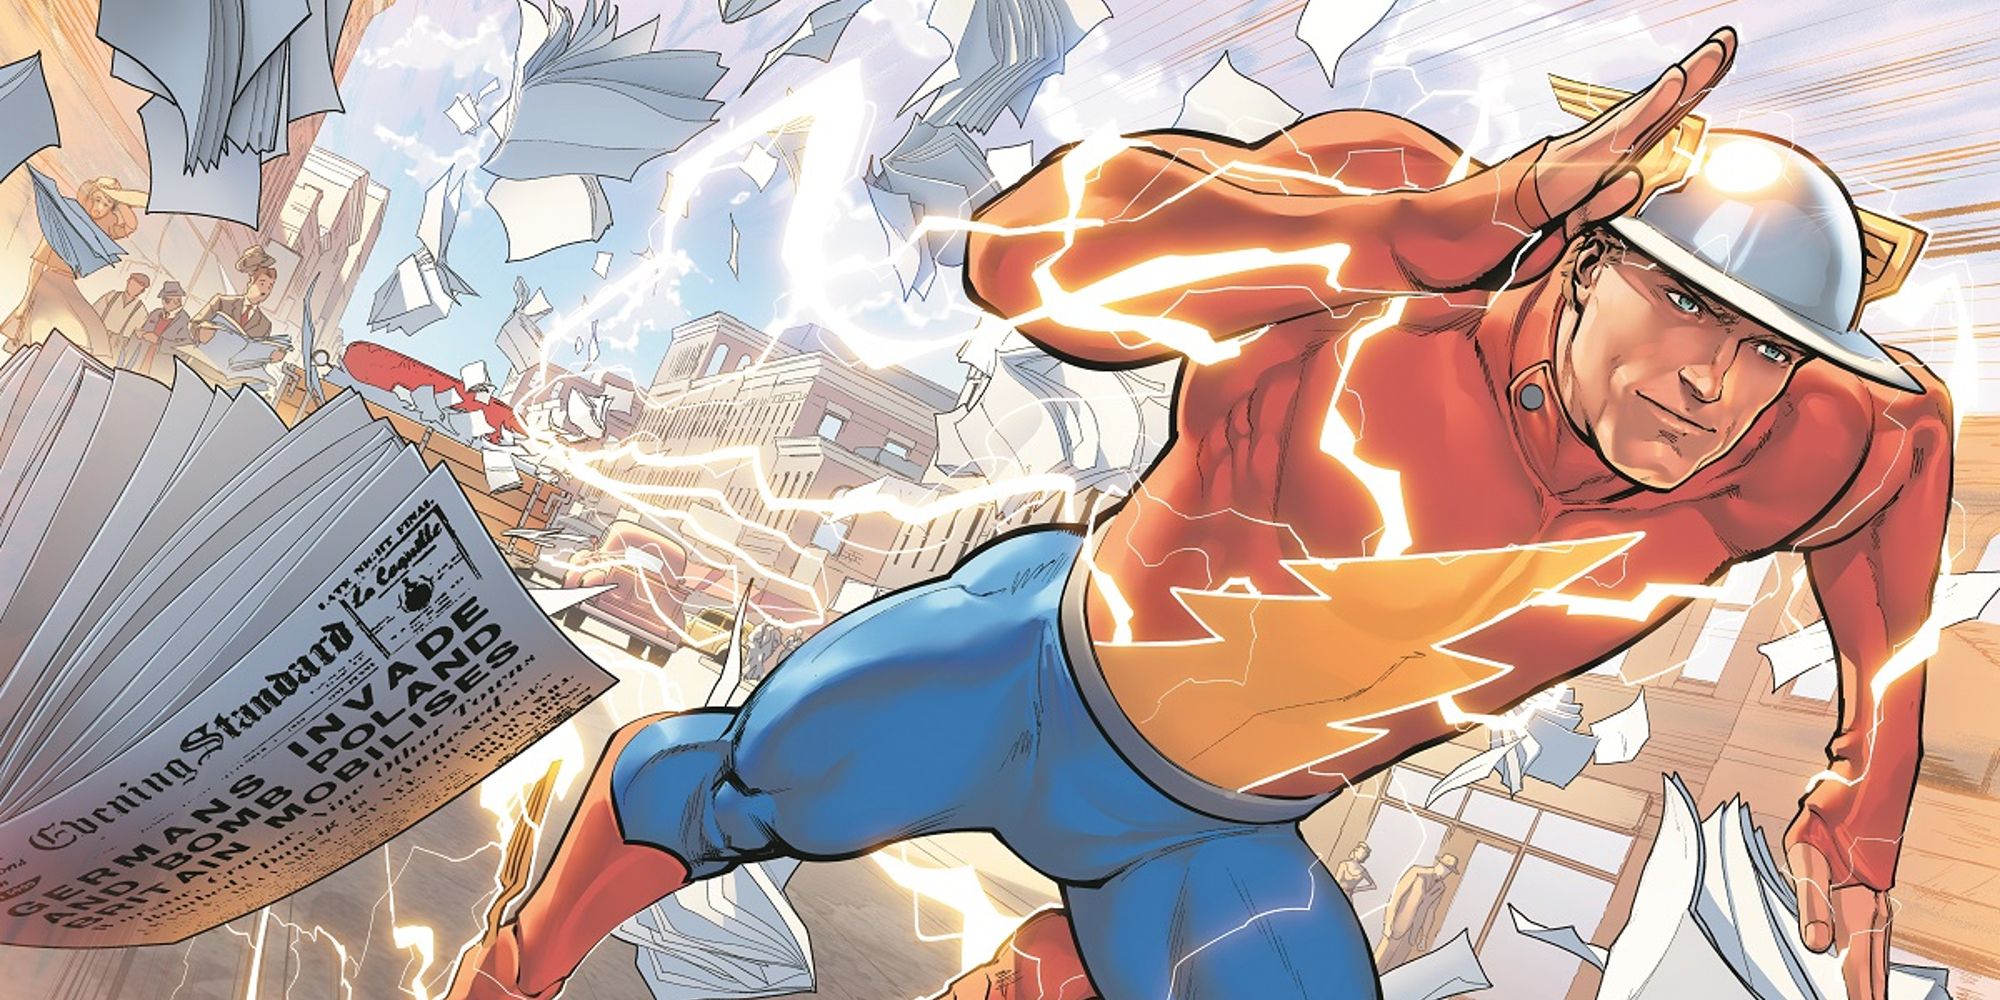 Jay Garrick running through the streets of Keystone City in The Flash #750